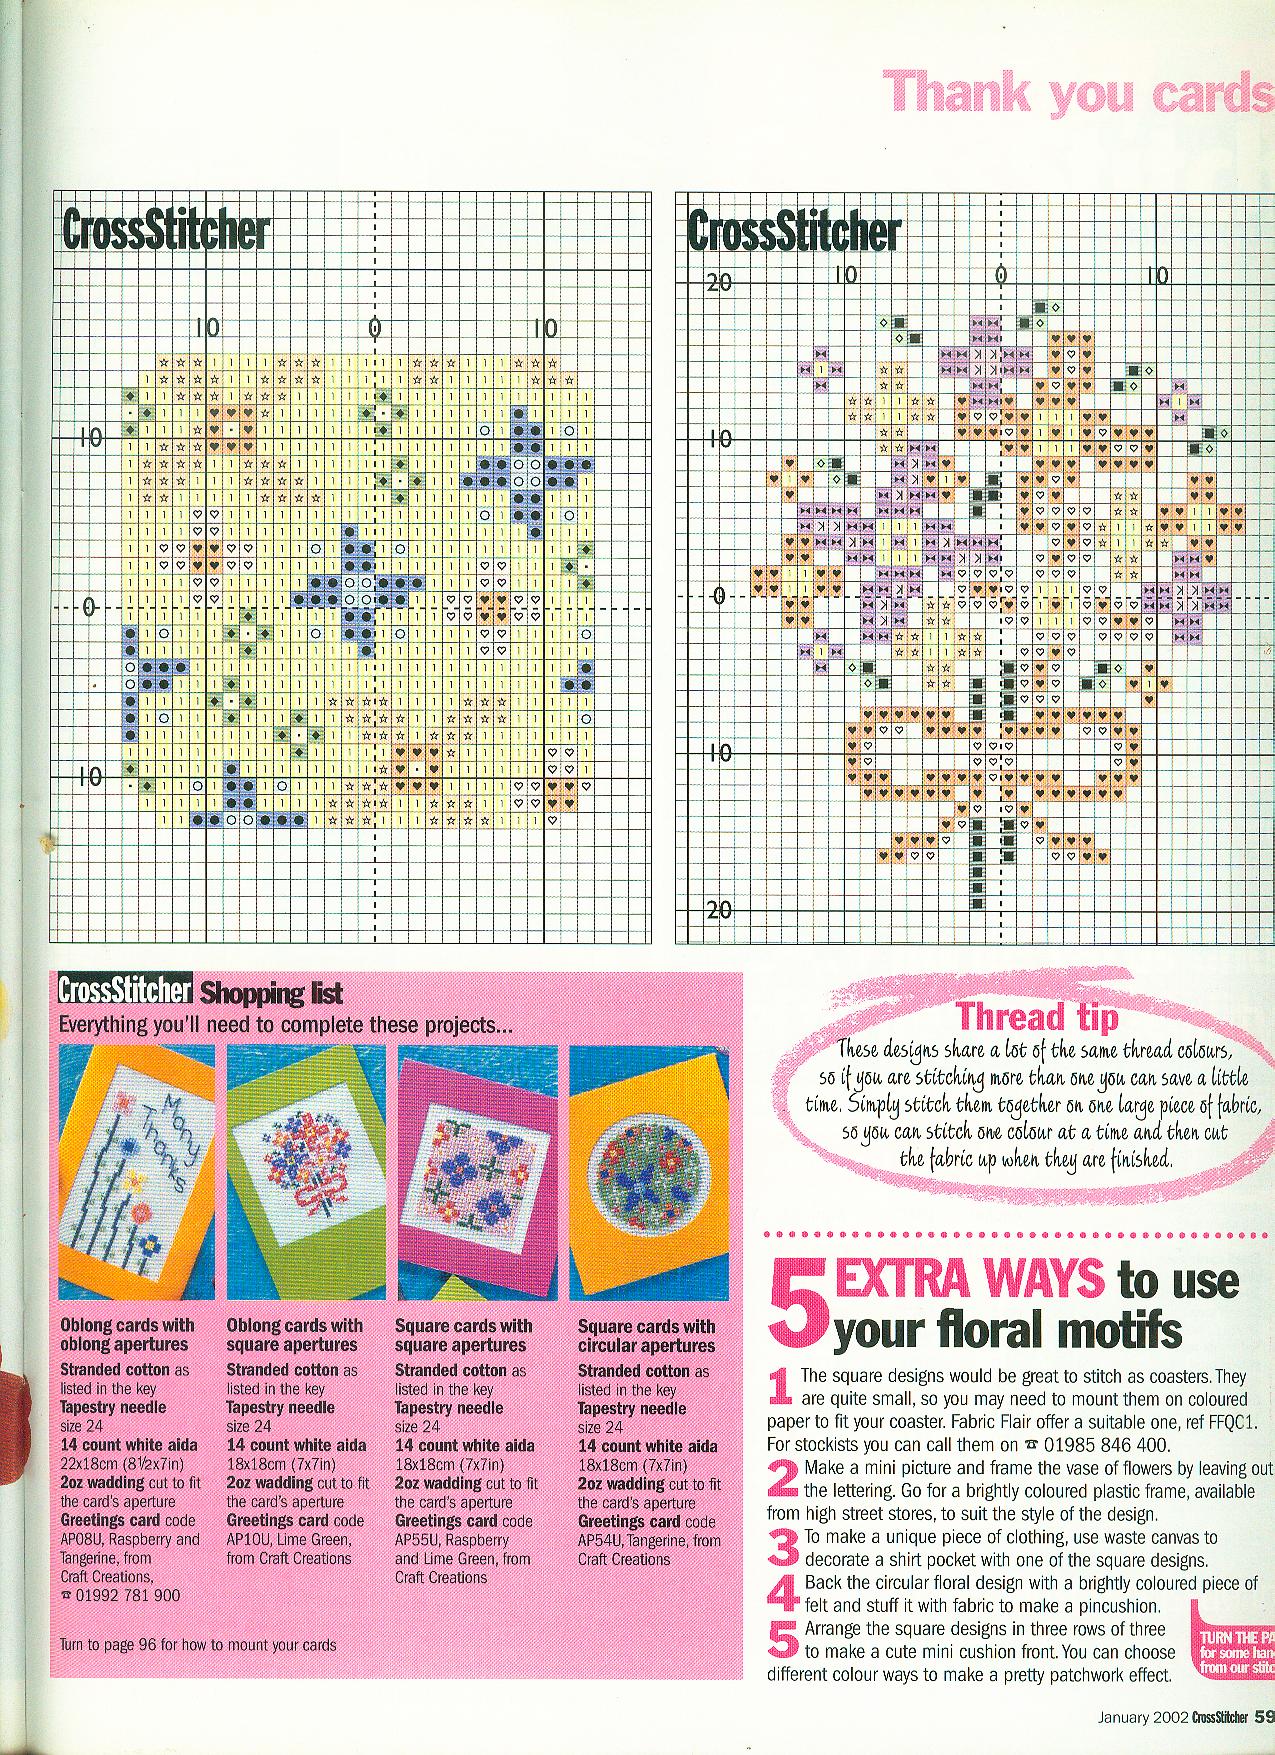 Cross stitch floral cards free patterns (3)